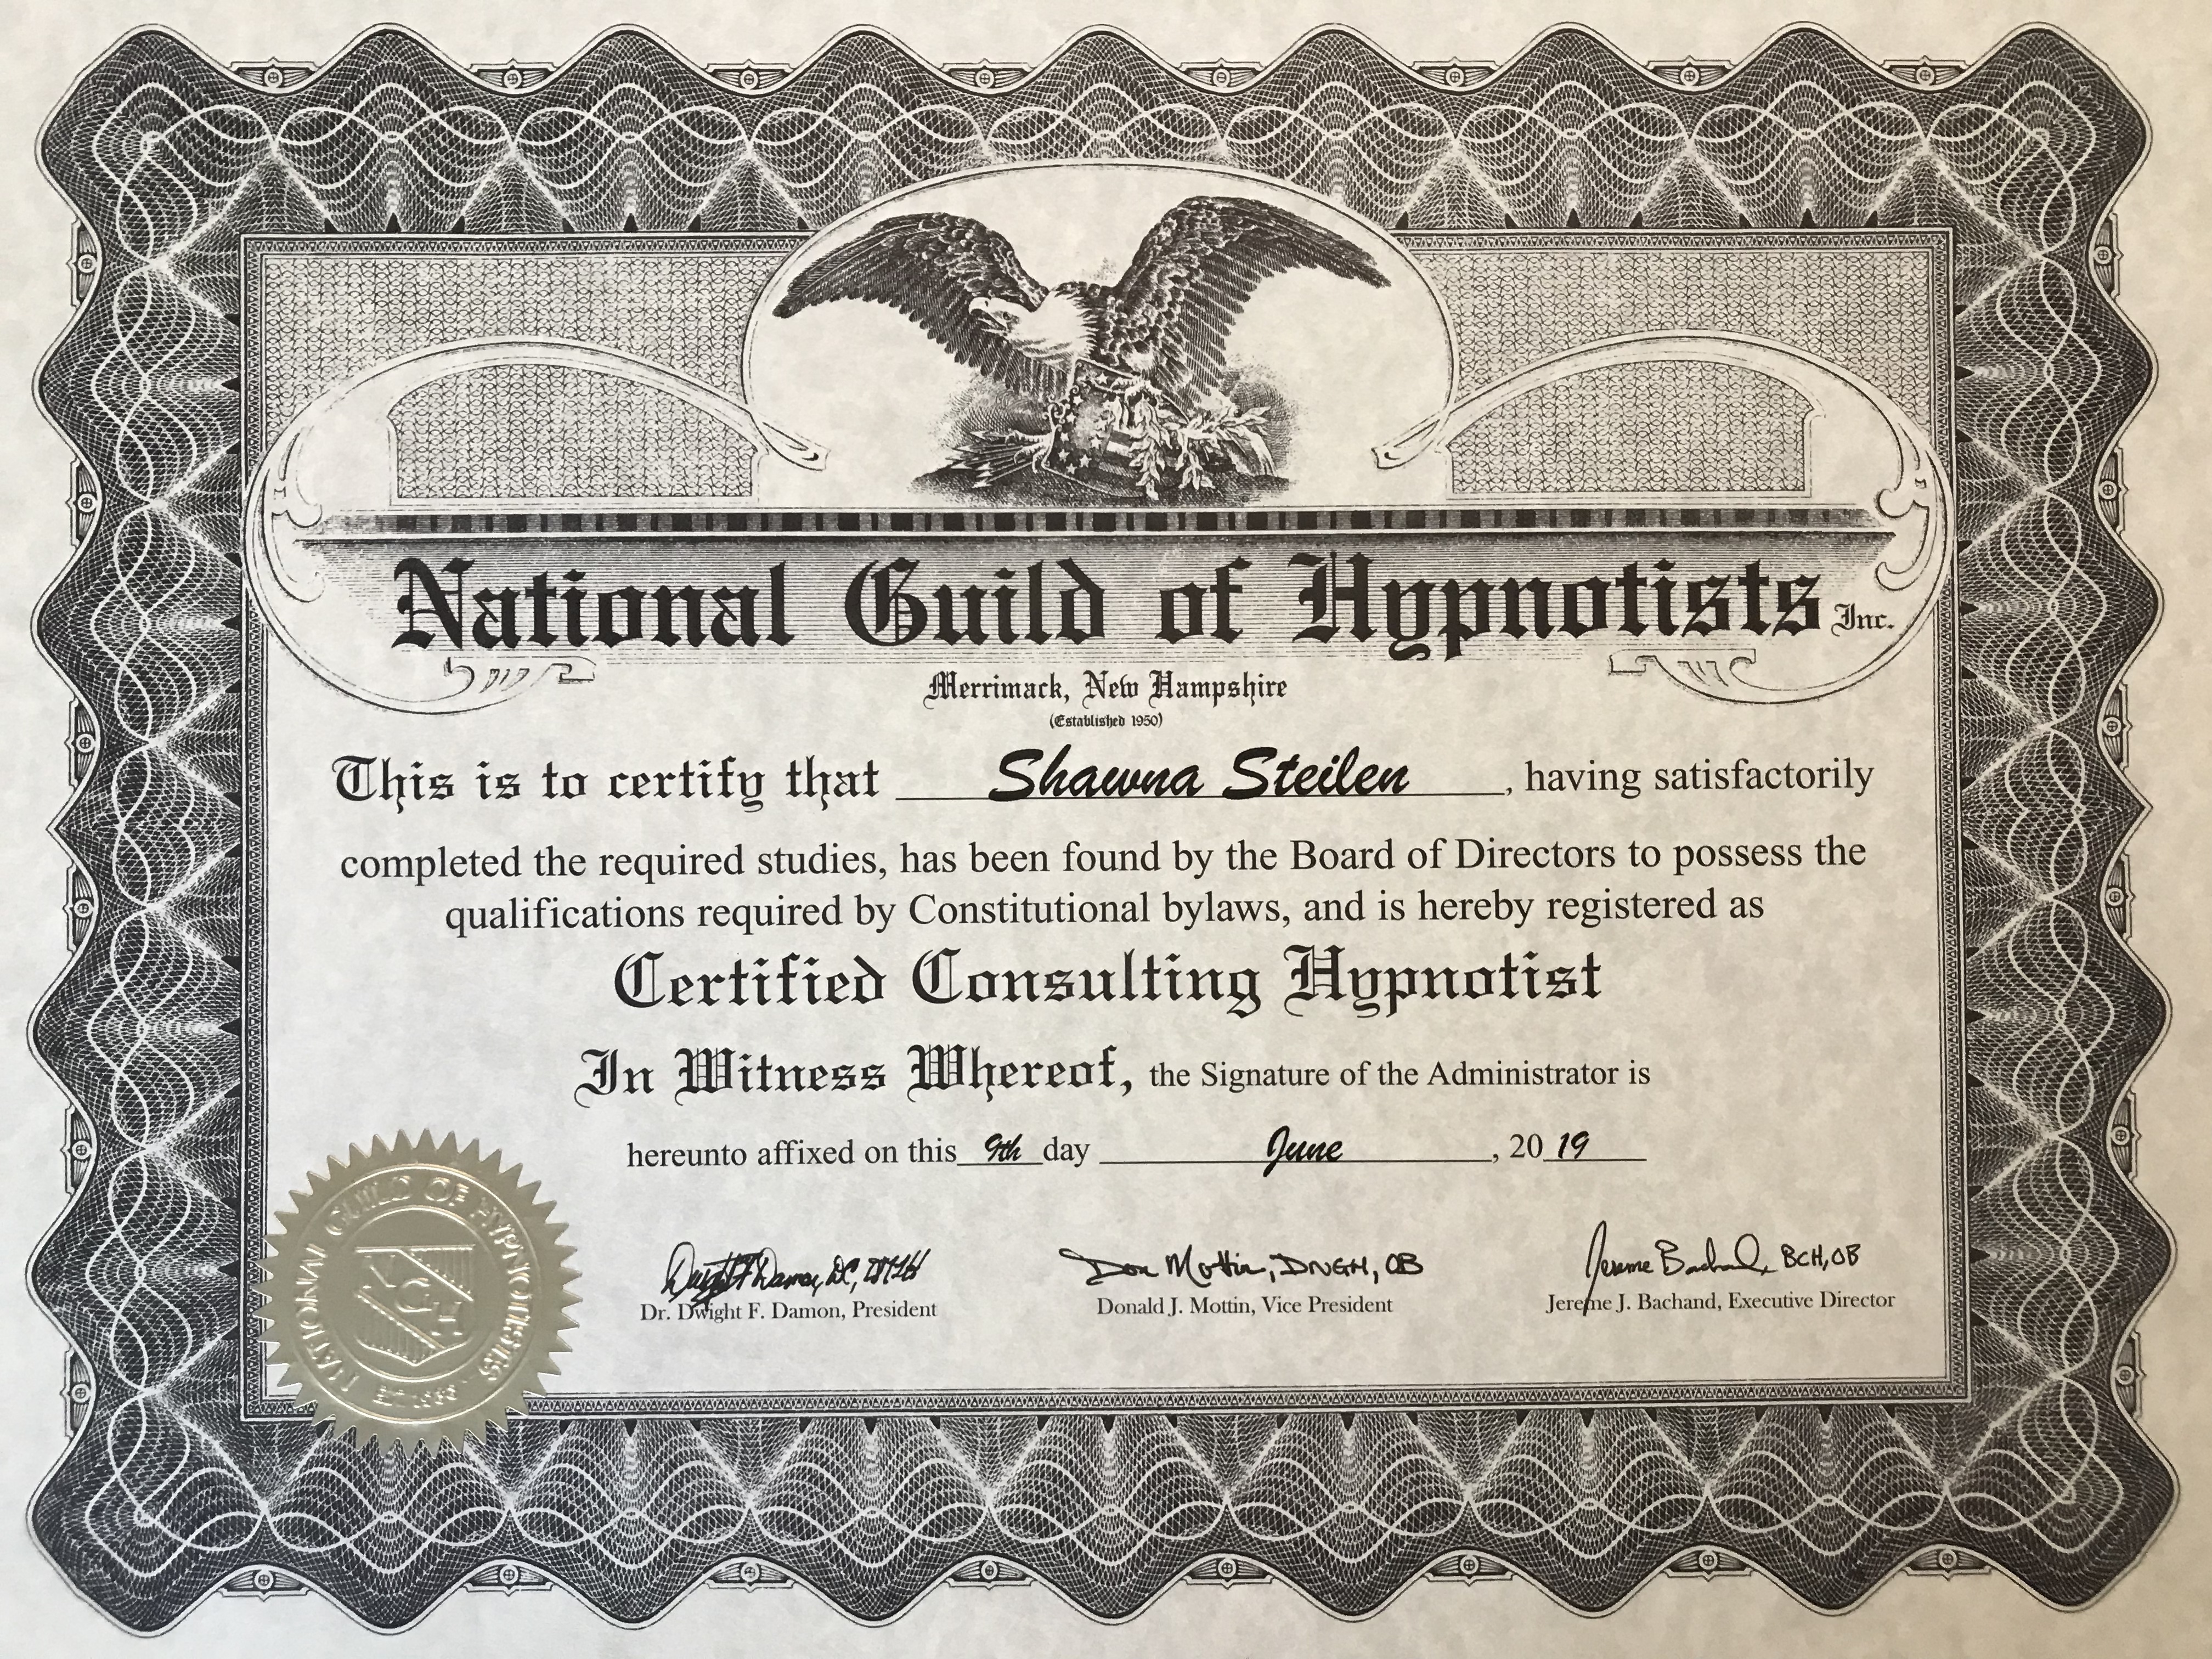 NGH Certified Consulting Hypnotist